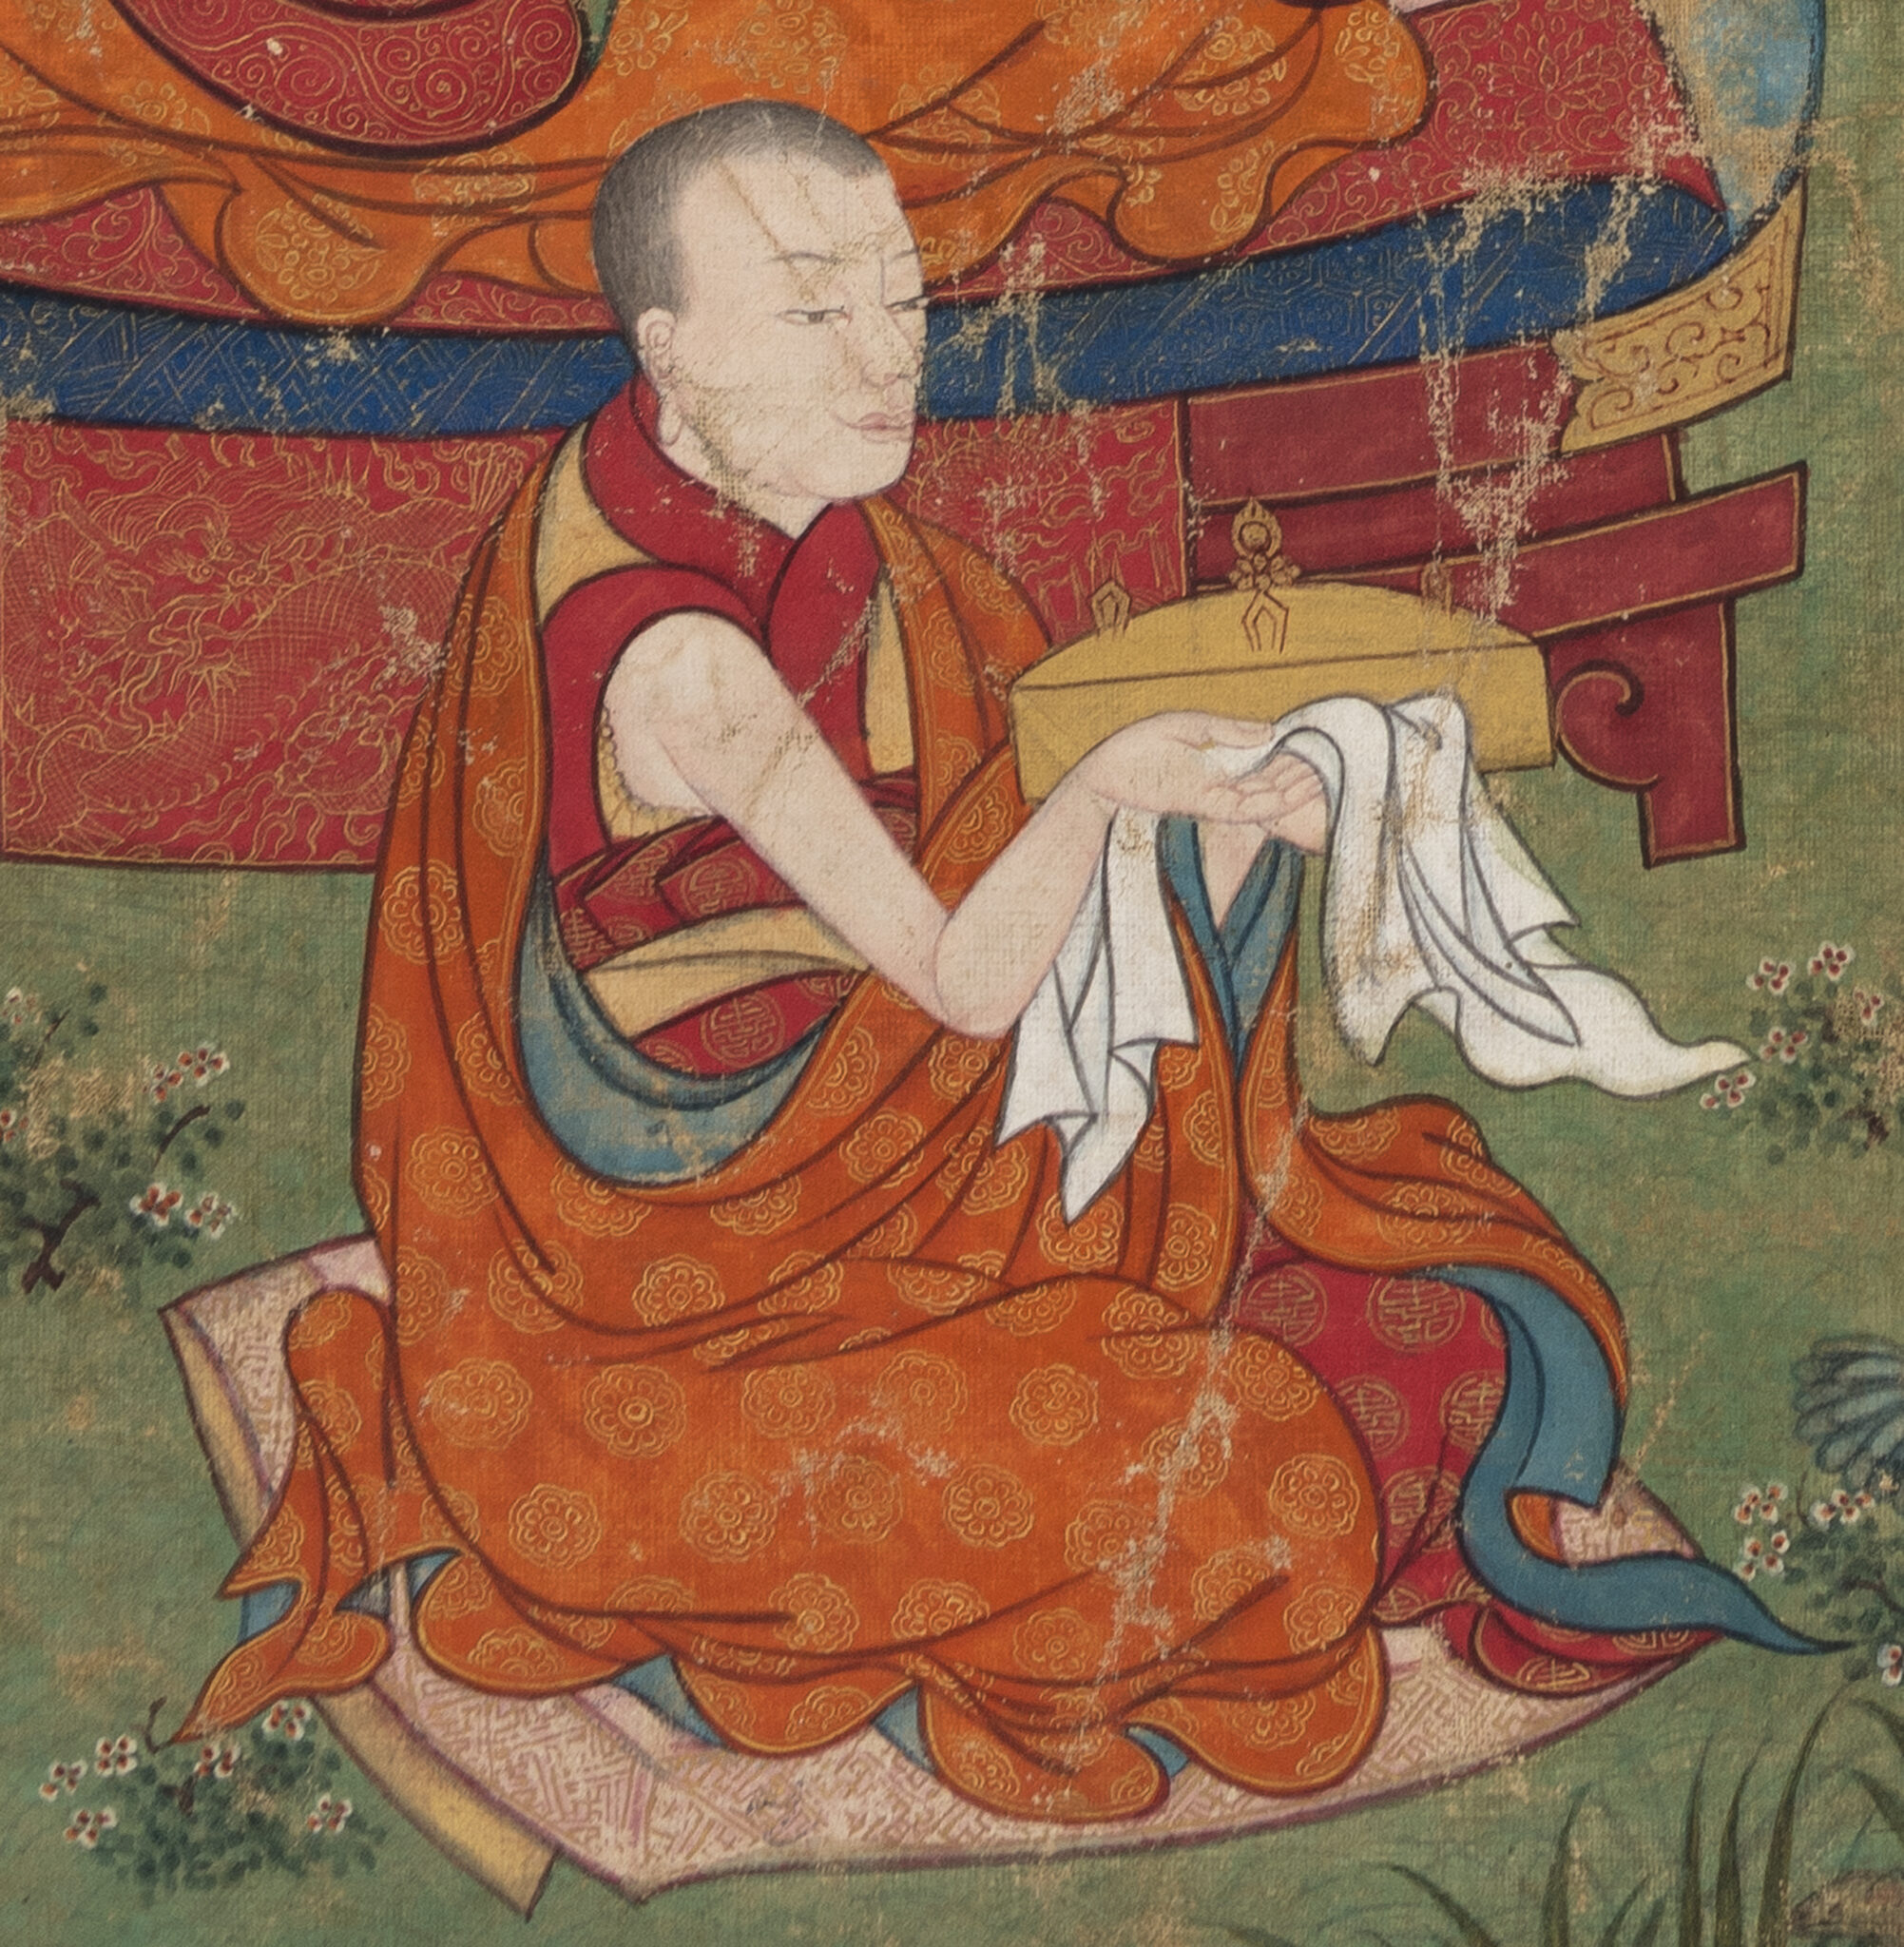 Monk, dressed in saffron brocade robe, kneels and holds forth white prayer scarf and yellow implements